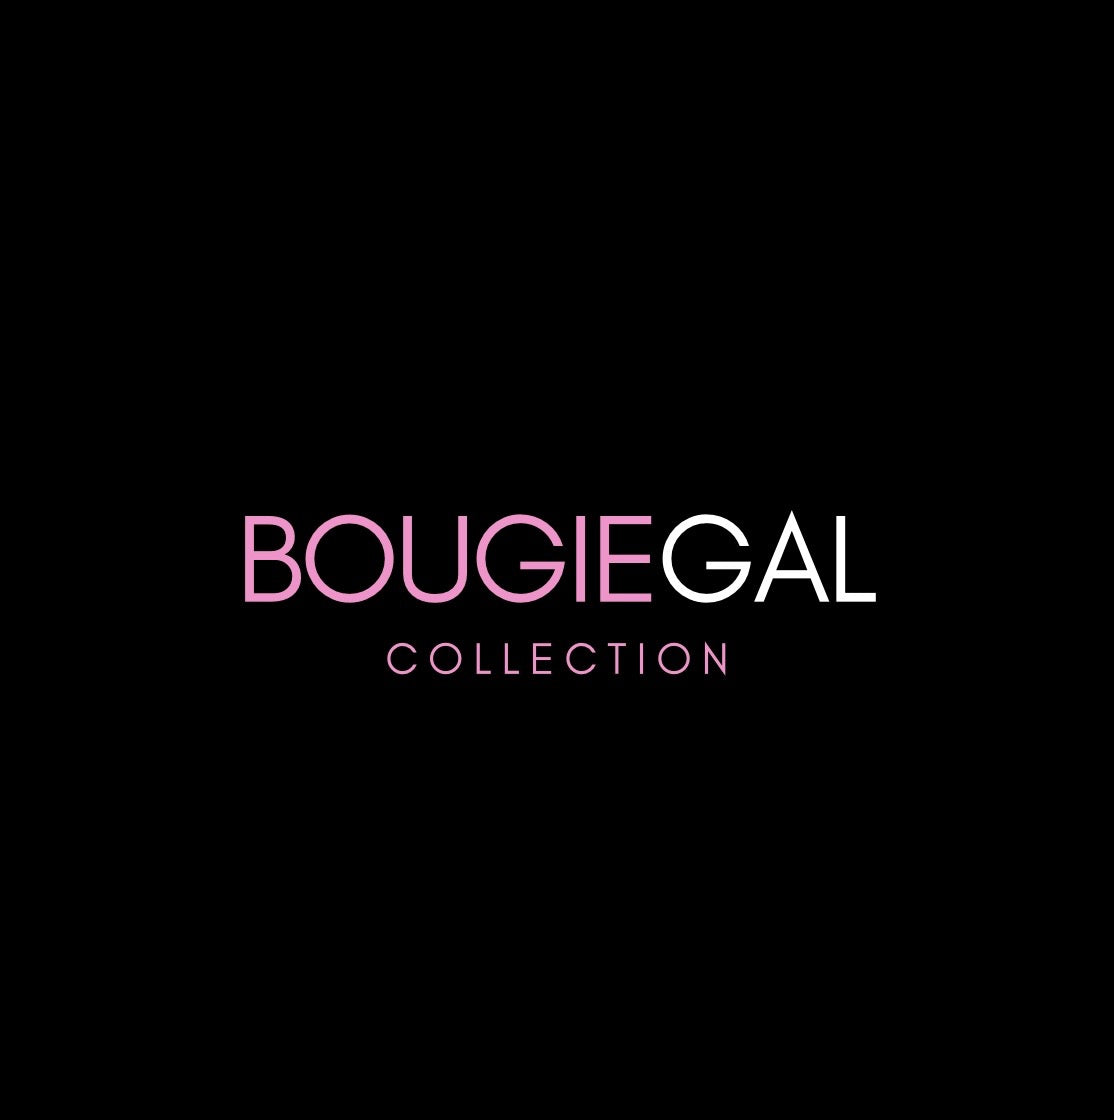 BougieGalCollection